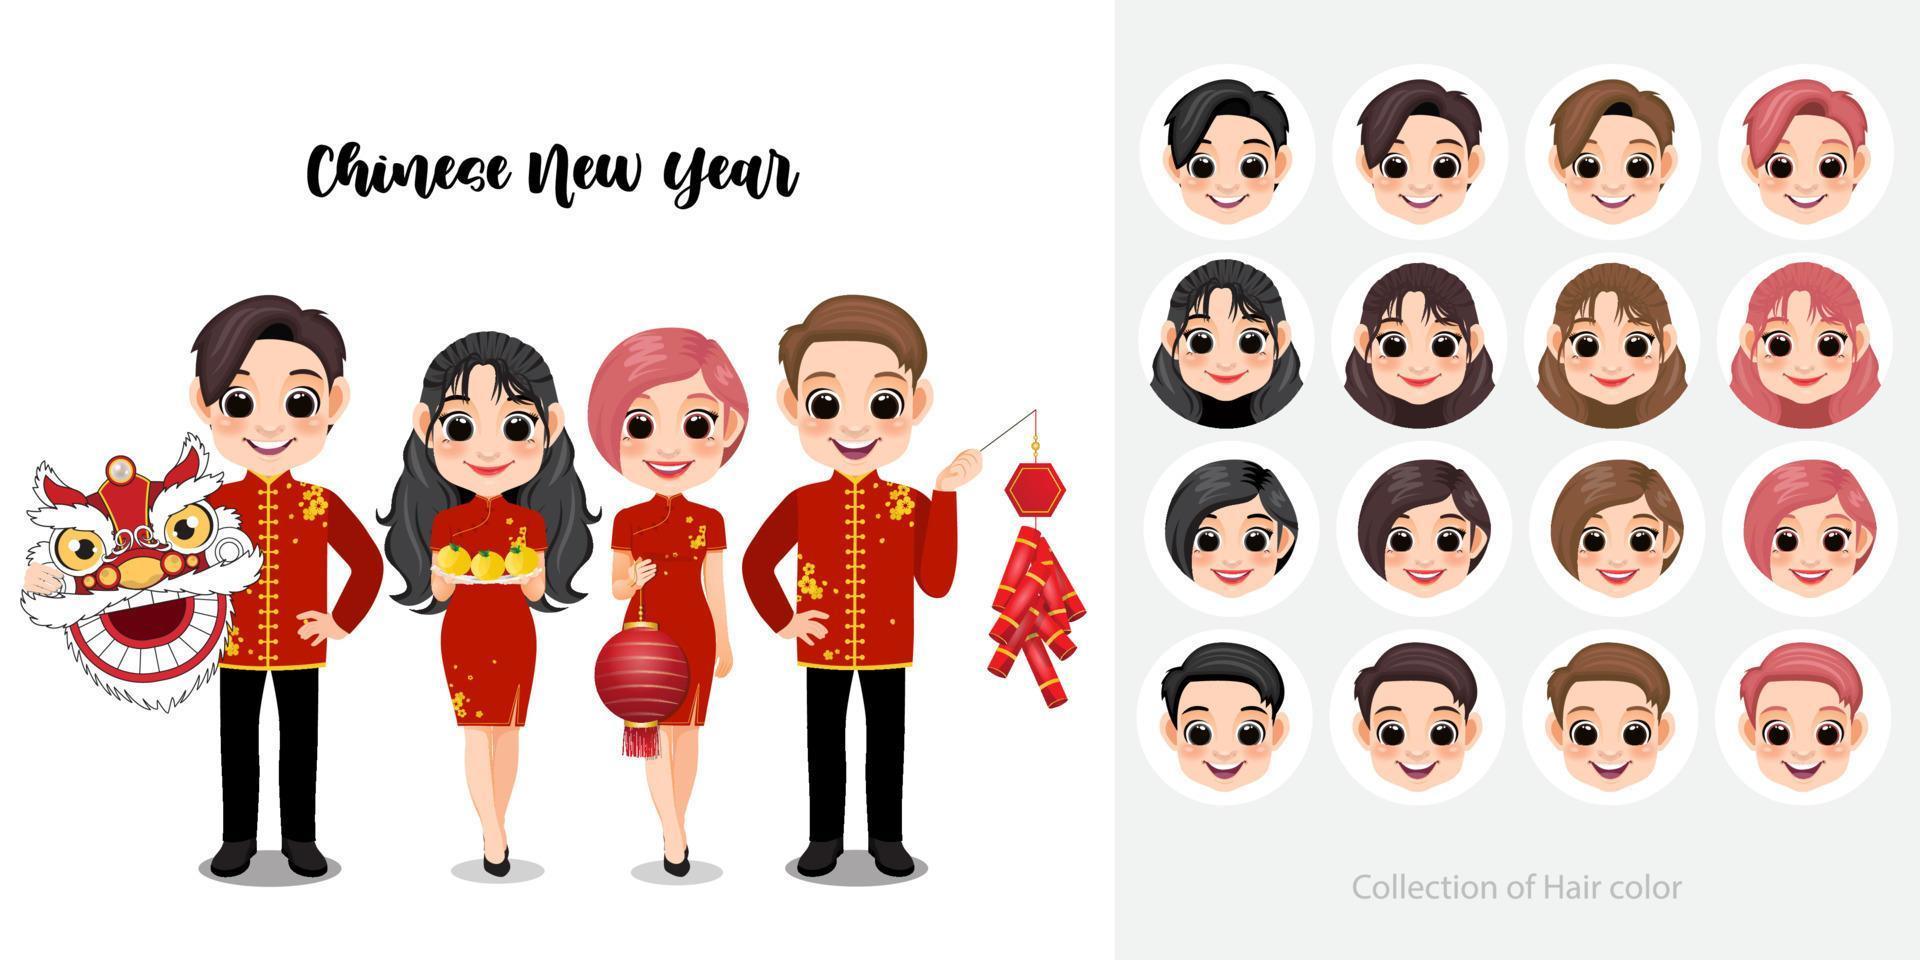 Chinese New Year with Kids holding Dragon Head, Orange, Lantern, Cracker on white background and collection of Hair color cartoon character vector